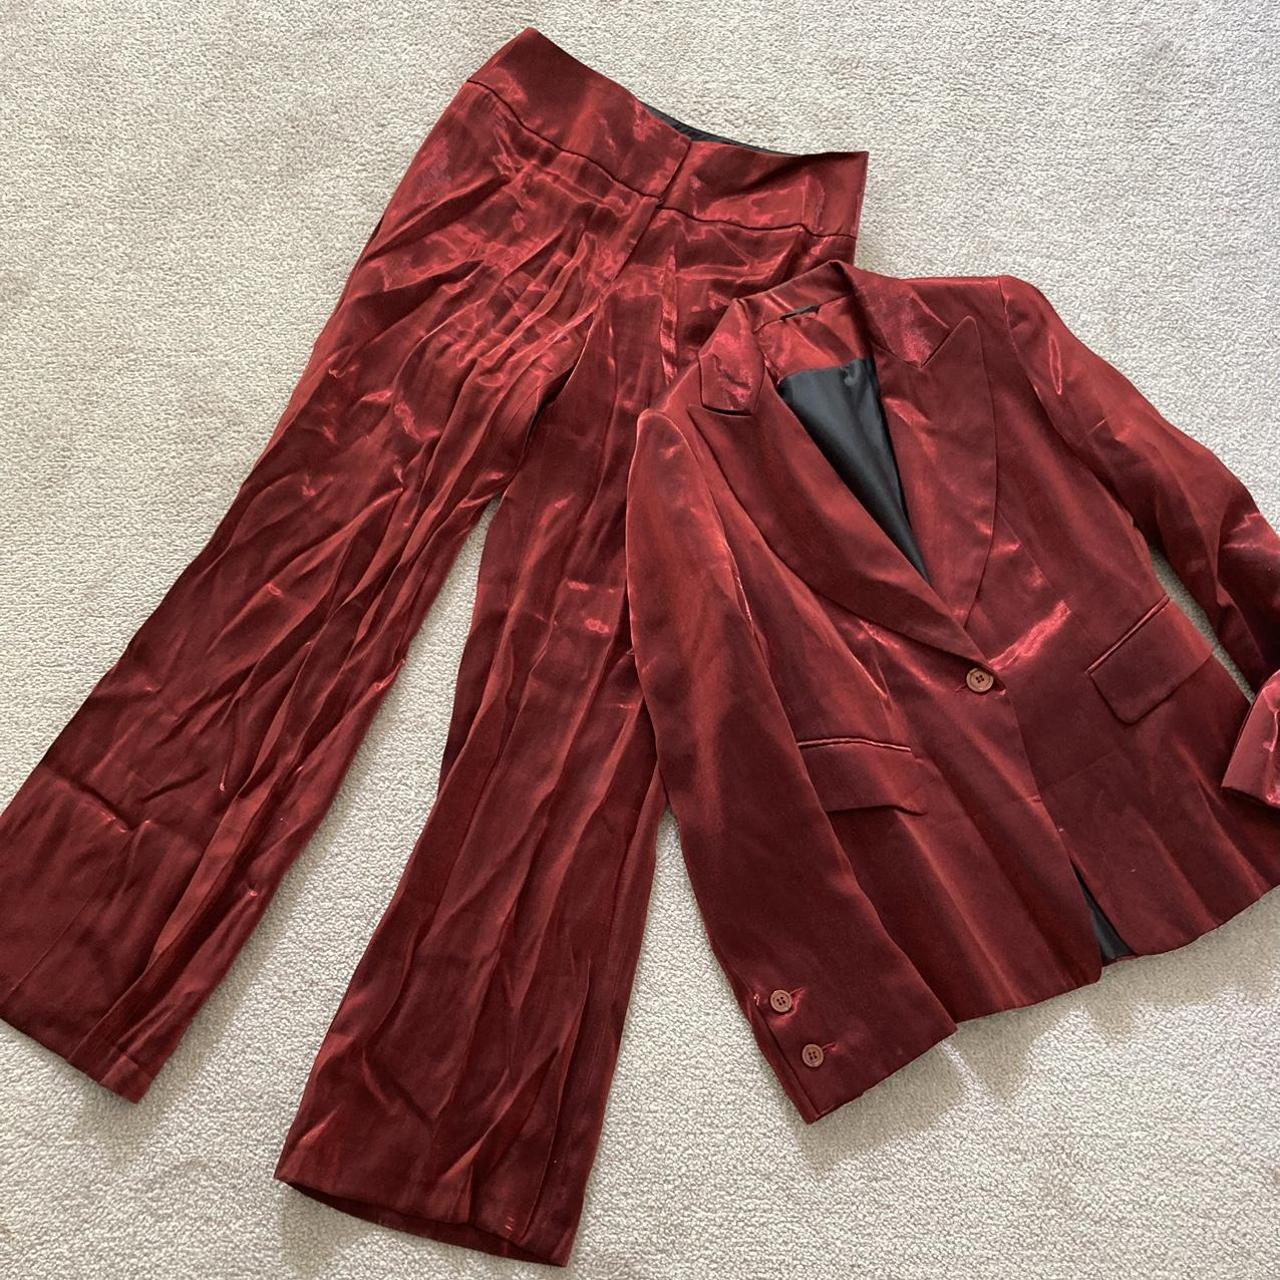 BAY 2p Burgundy Pant Work Suit NWT S/M. 🔥 Such a... - Depop